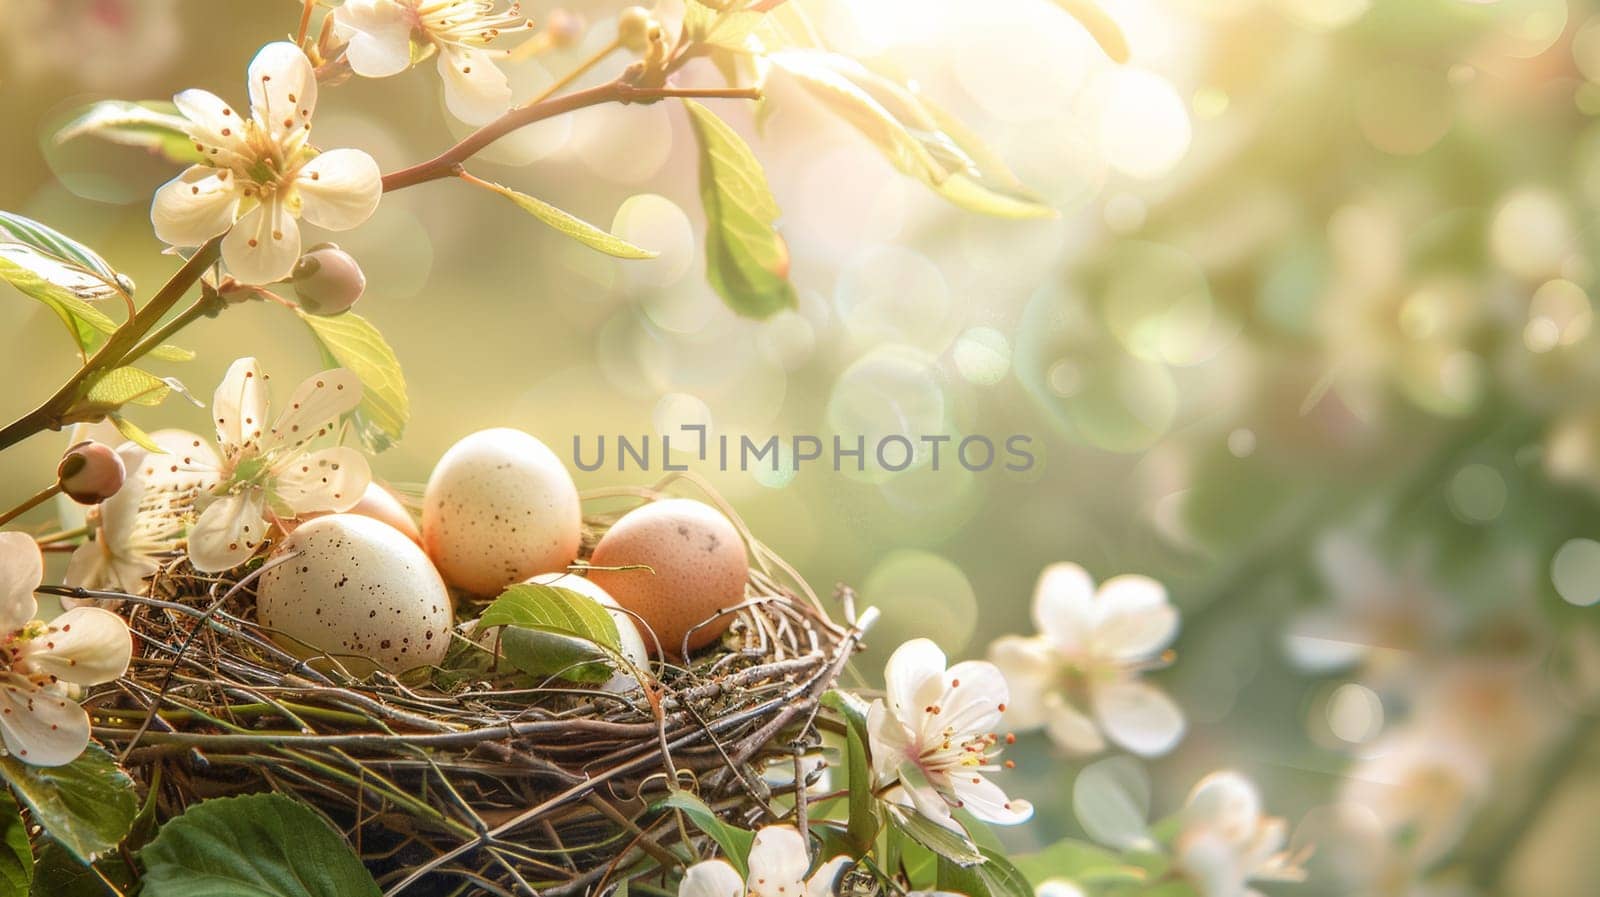 A nest with eggs in it on a tree branch